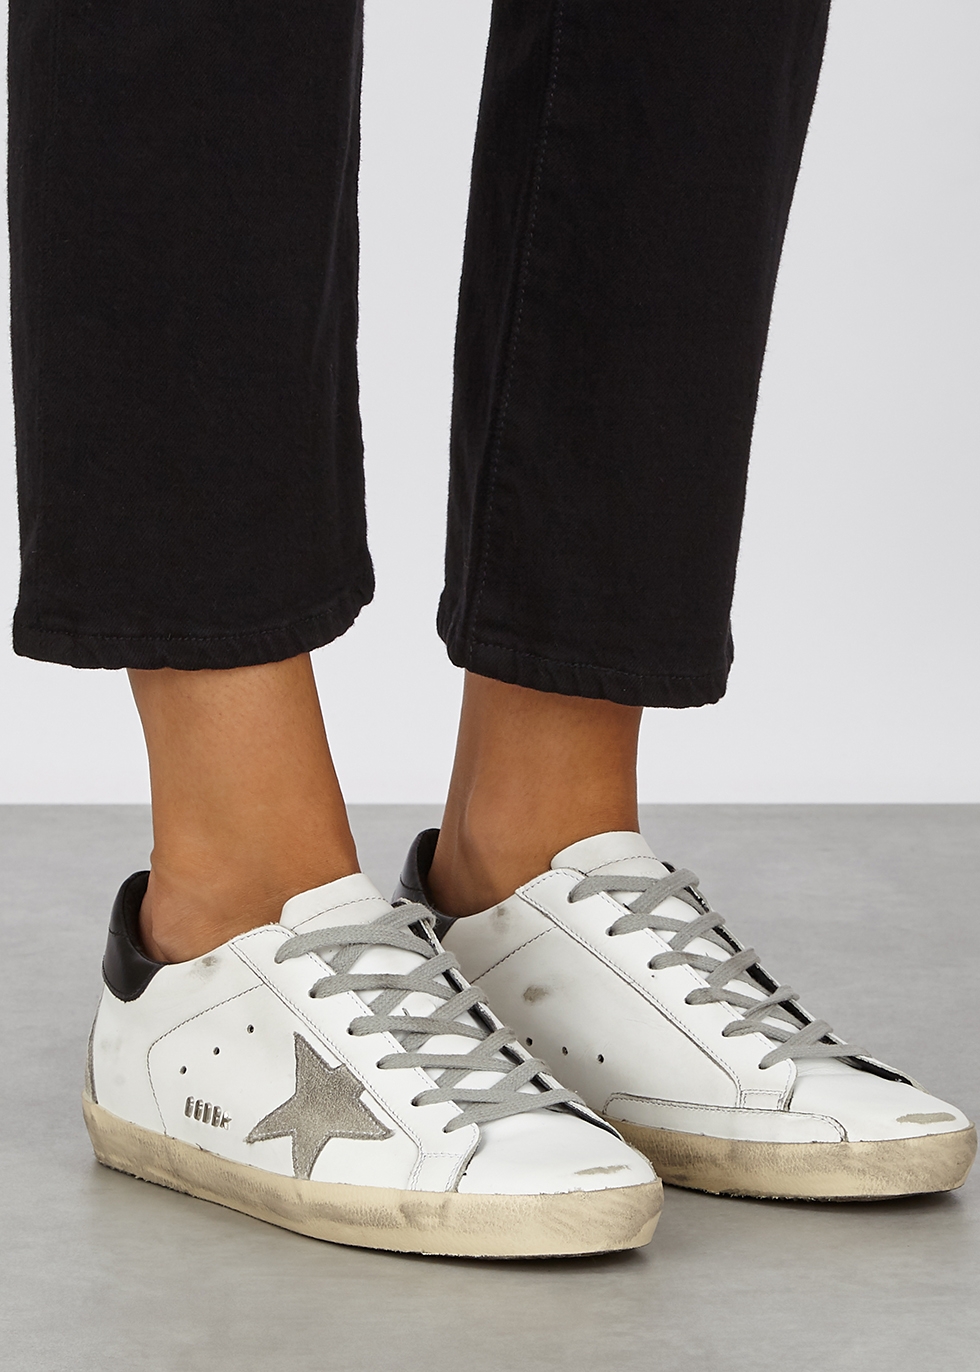 golden goose deluxe brand superstar distressed leather and suede sneakers